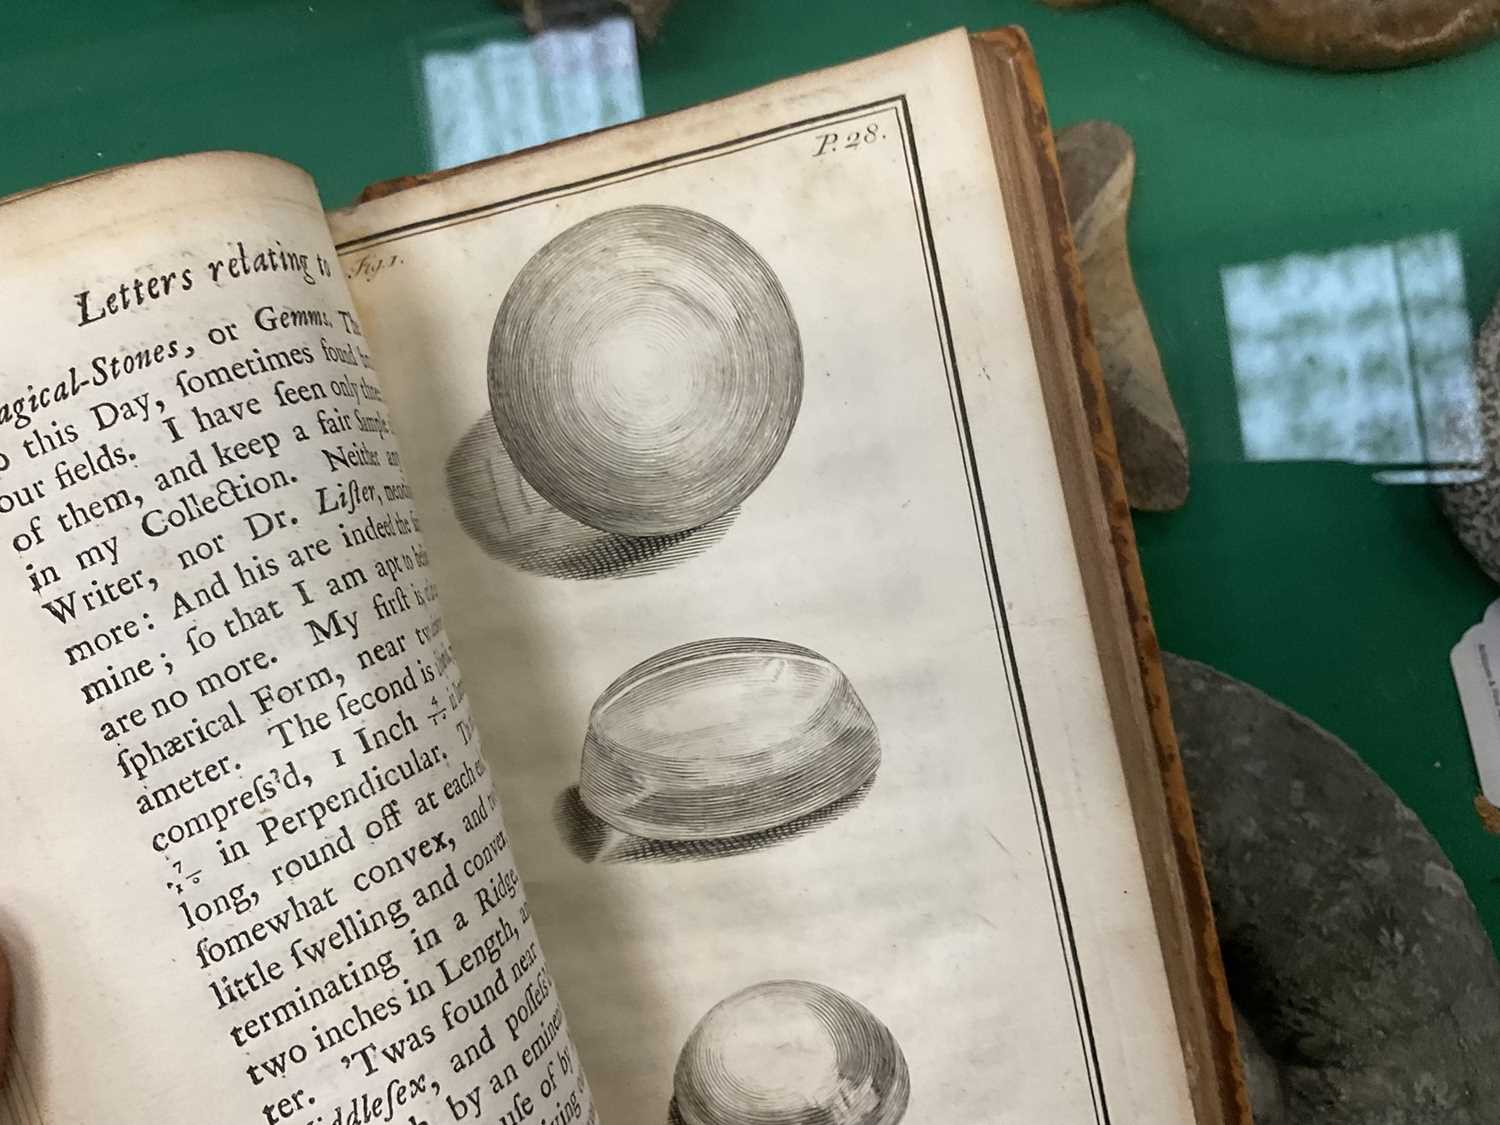 John Woodward - Fossils of all Kinds, 1728 first edition - Image 10 of 18